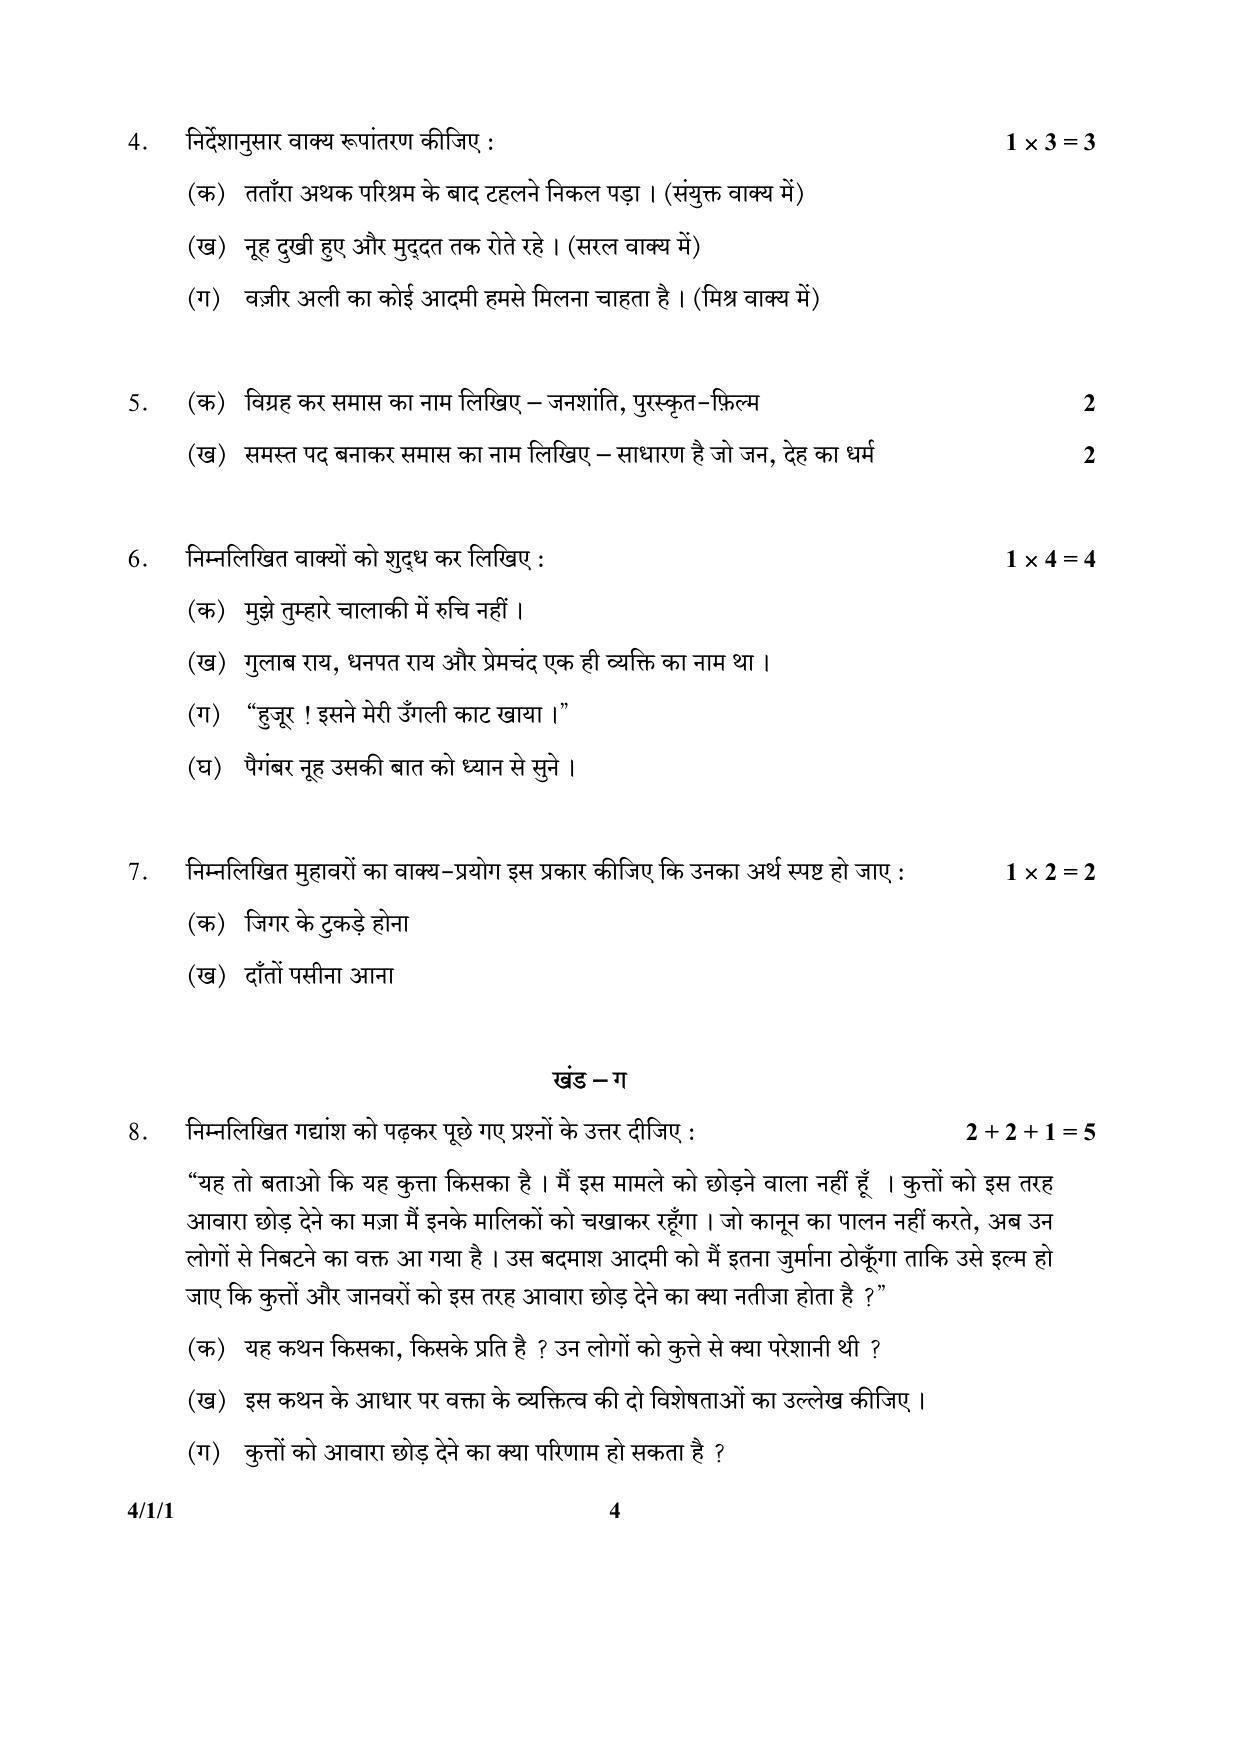 CBSE Class 10 4-1-1_Hindi 2017-comptt Question Paper - Page 4